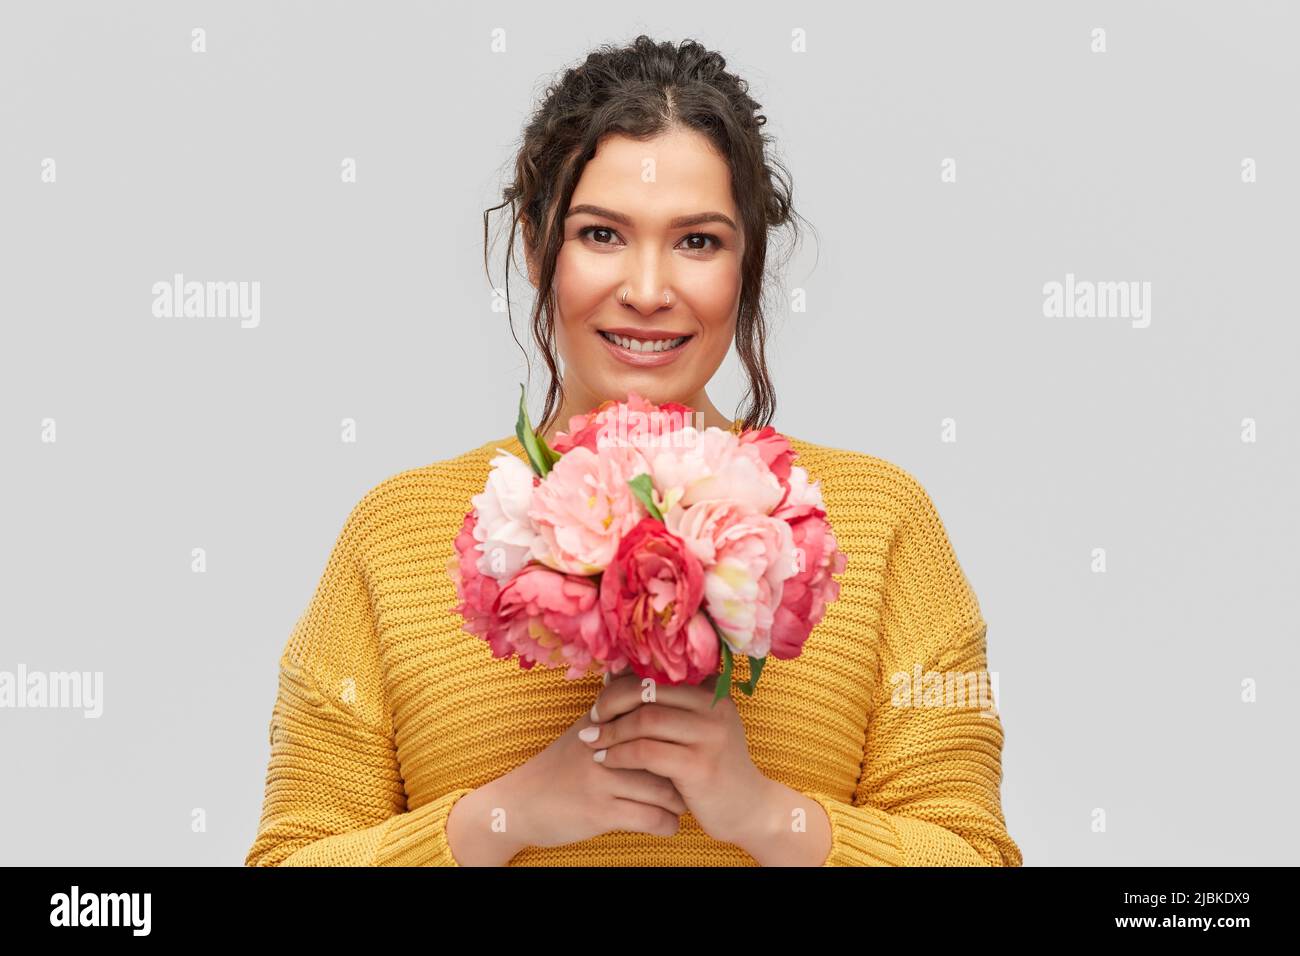 happy smiling young woman with bunch of flowers Stock Photo